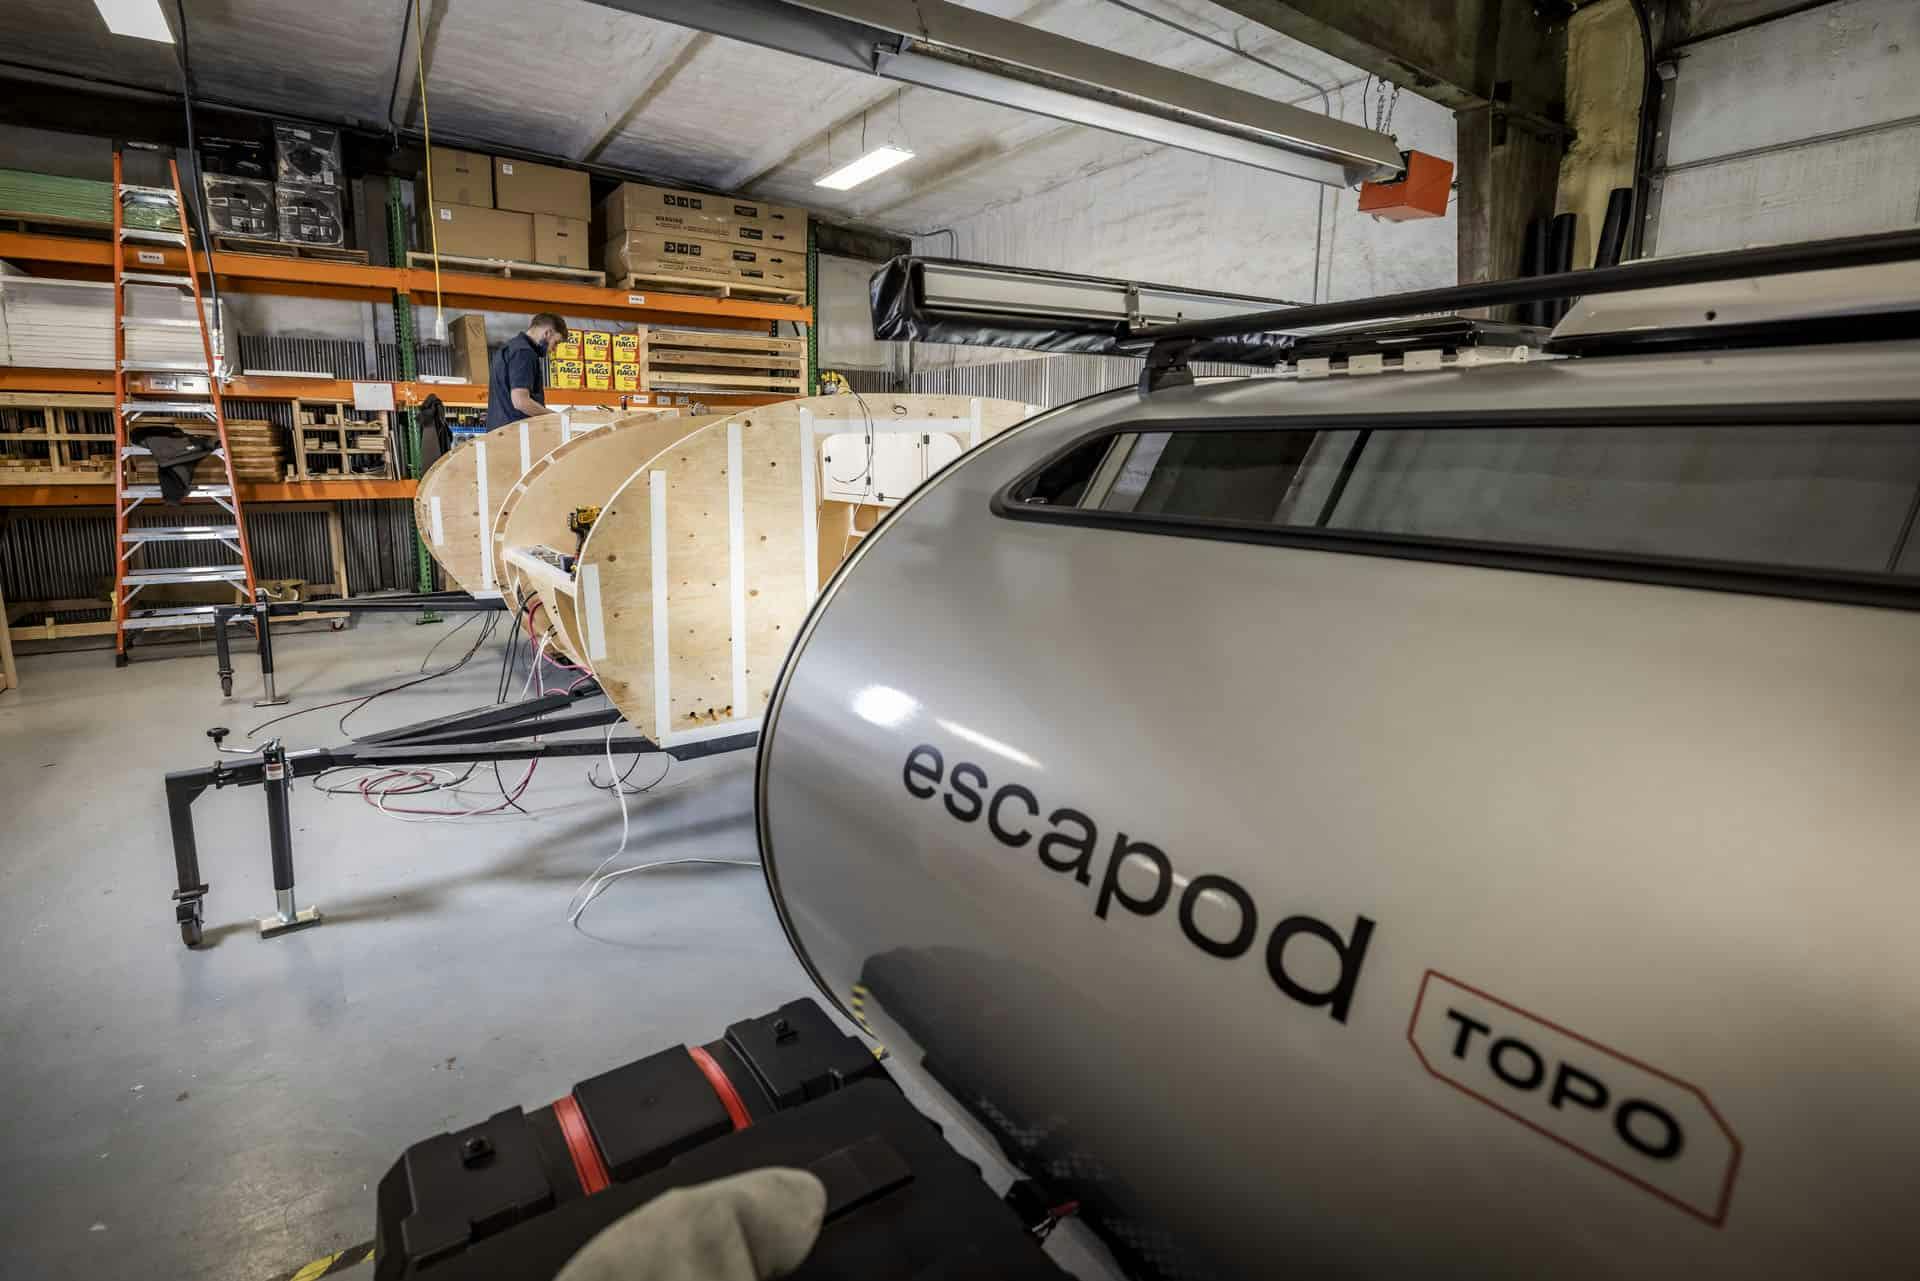 Teardrop camper being built in a small manufacturing facility.